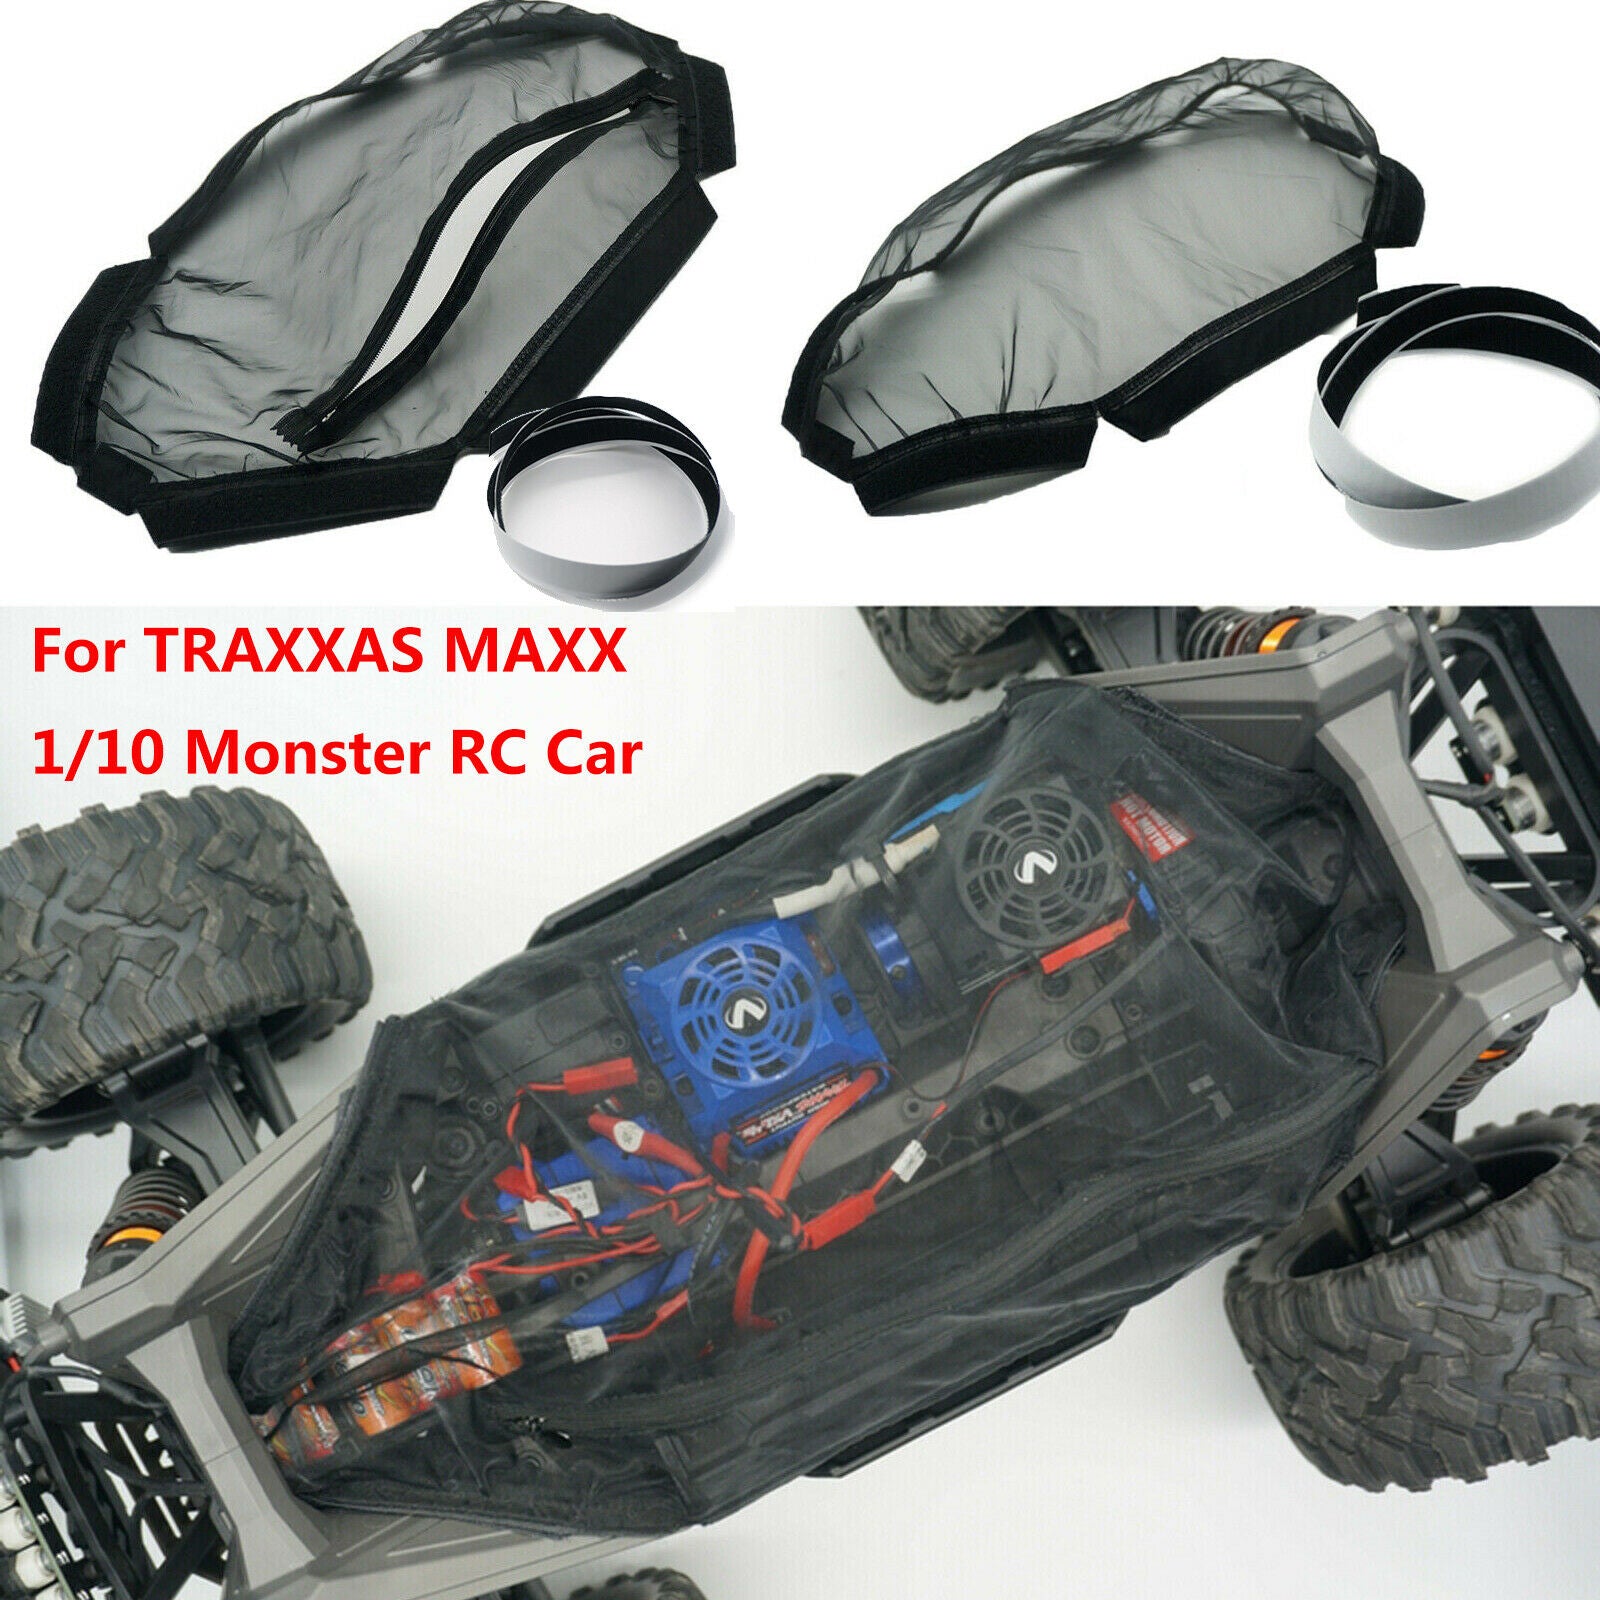 For TRAXXAS MAXX 1/10 Monster RC Car Body Gearbox ProtonRC Dust-proof Cover Dirt Guard